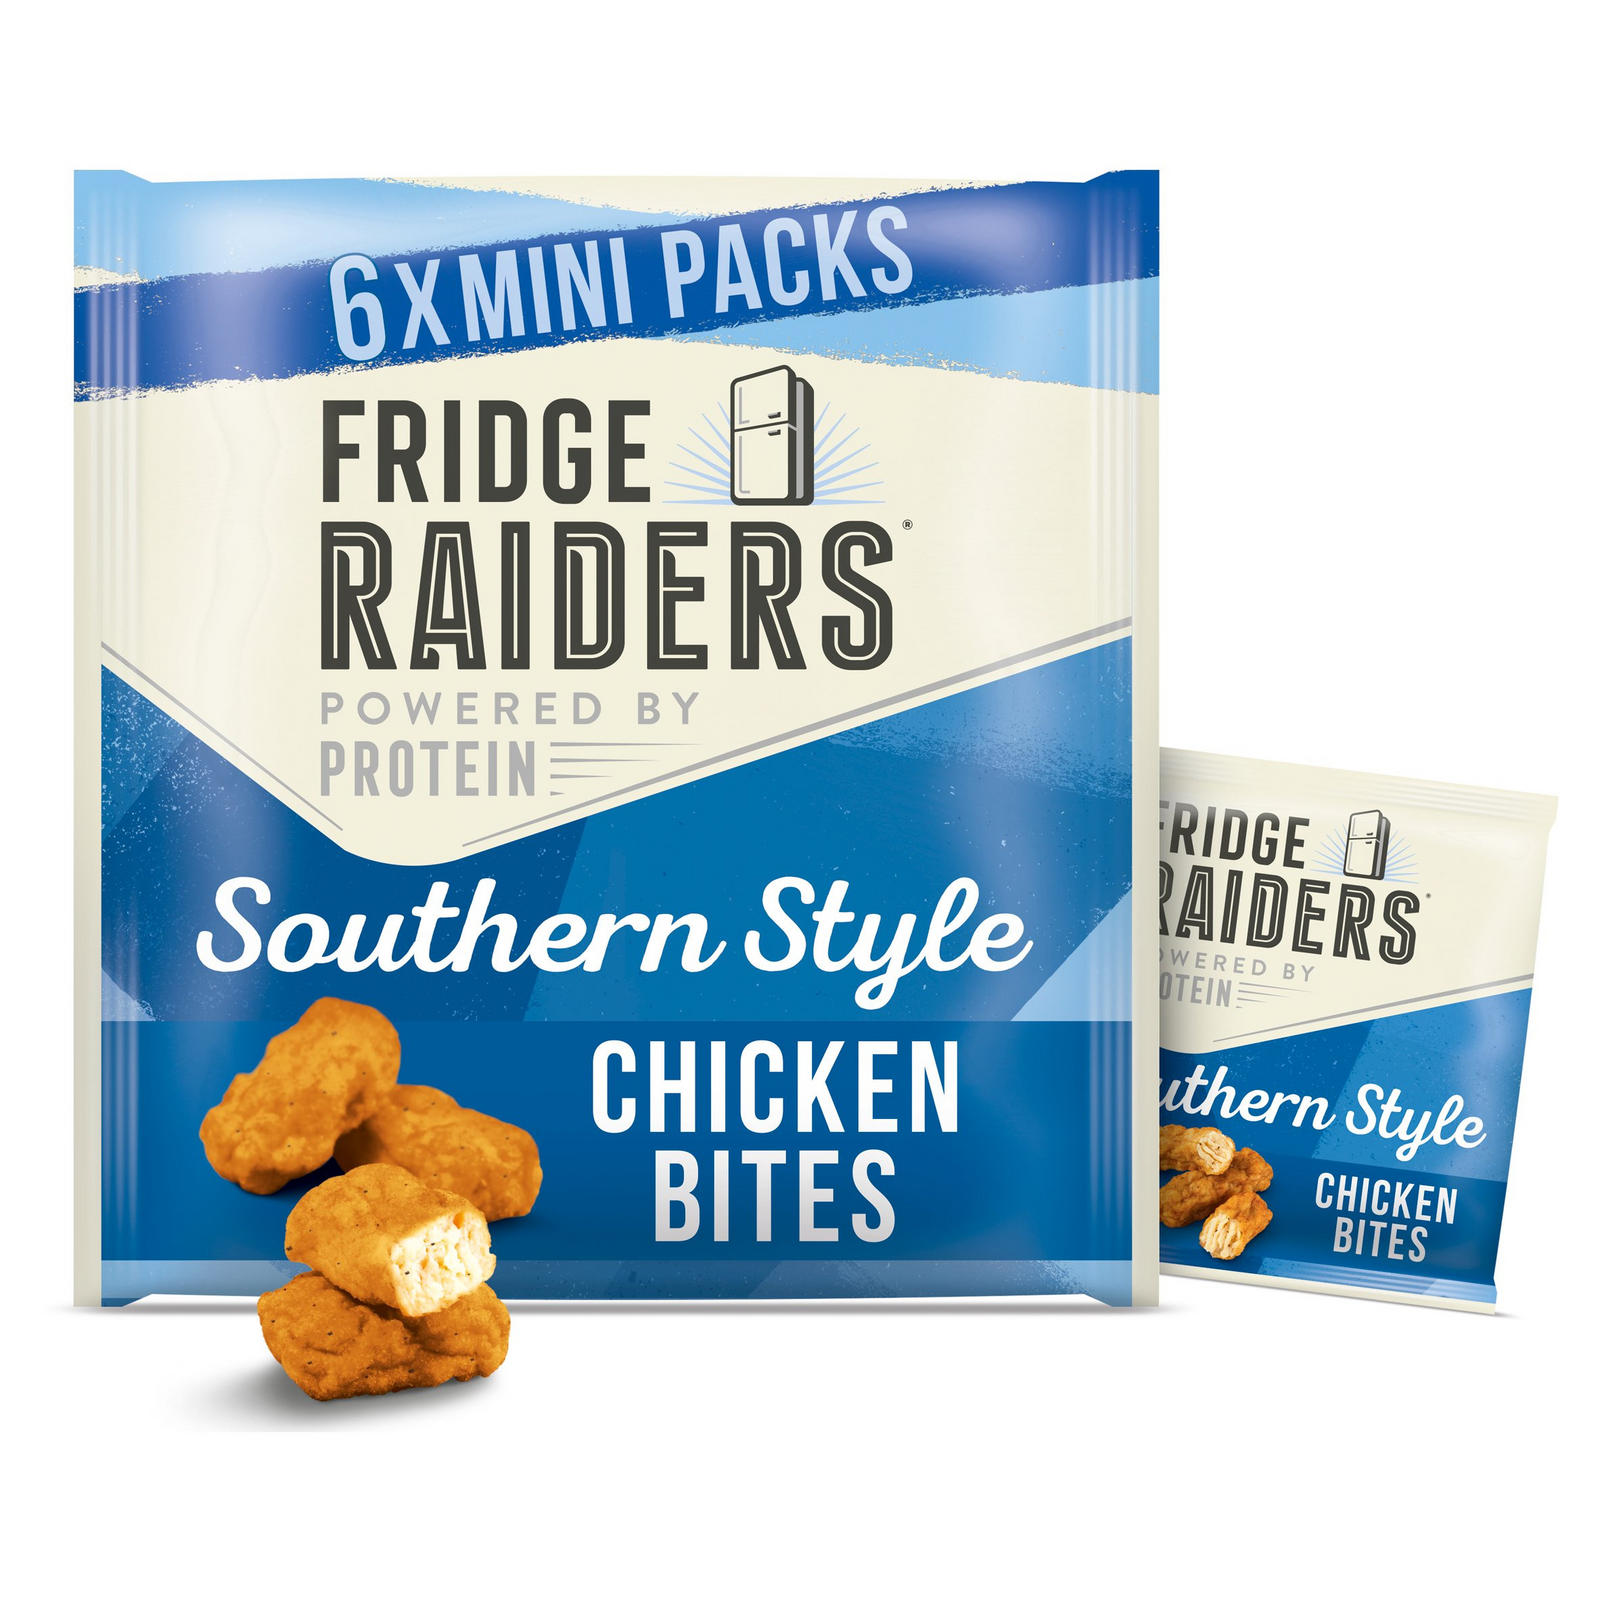 Can You Put Potatoes In The Fridge Raider Fridge Raiders Southern Style Chicken Bites Mini Packs 6 X 22 5g Cooked Meats Deli Iceland Foods